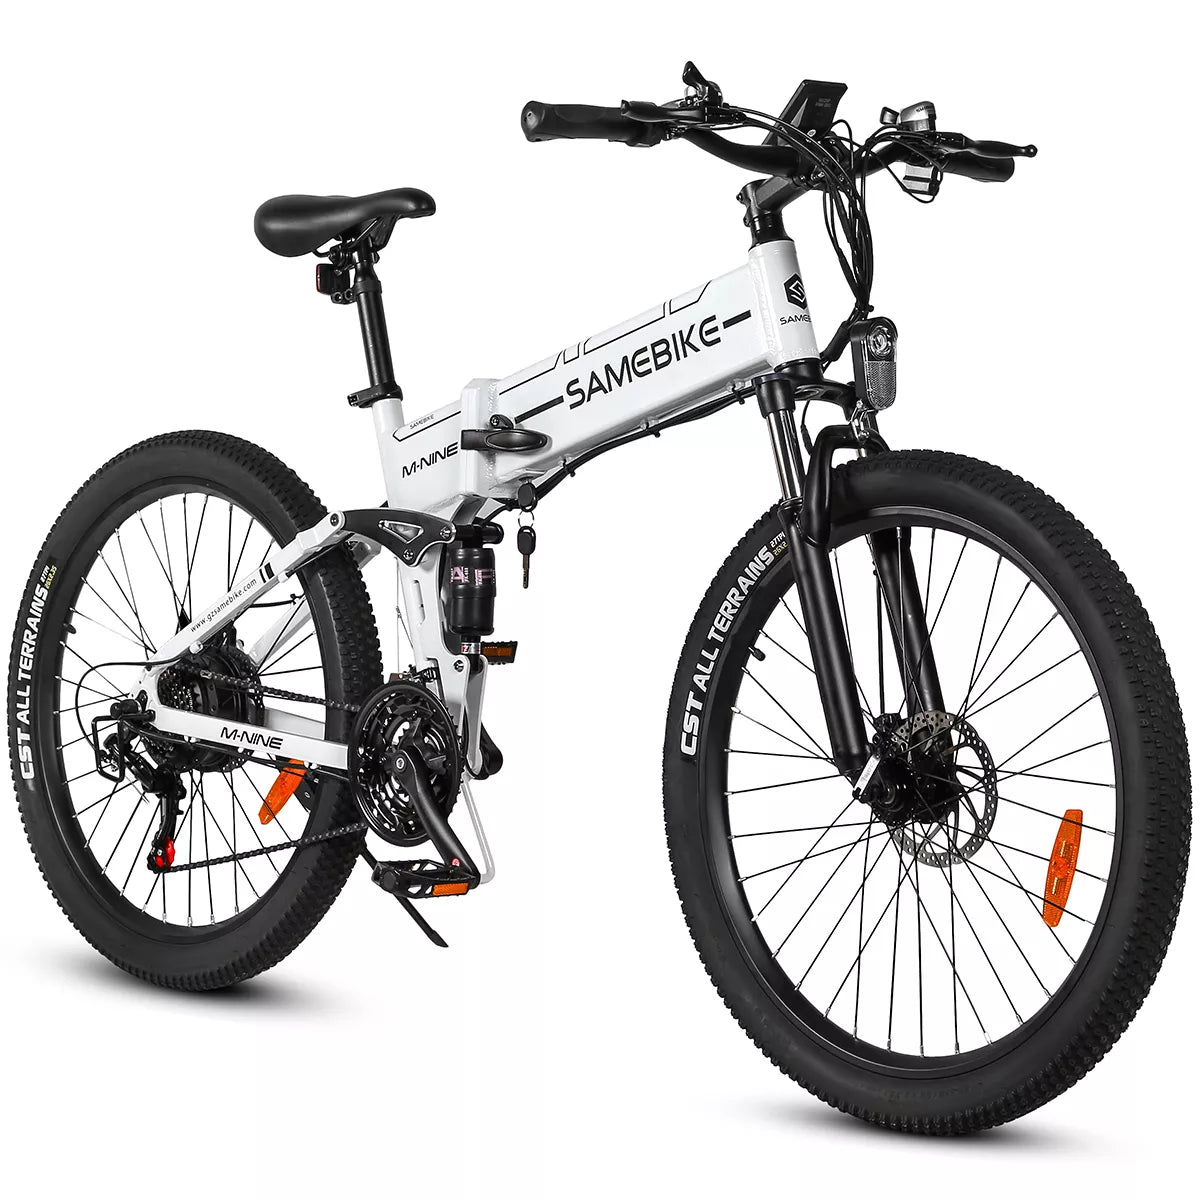 Samebike LO26-II 750w Electric Bike - Preorder - Pogo cycles UK -cycle to work scheme available